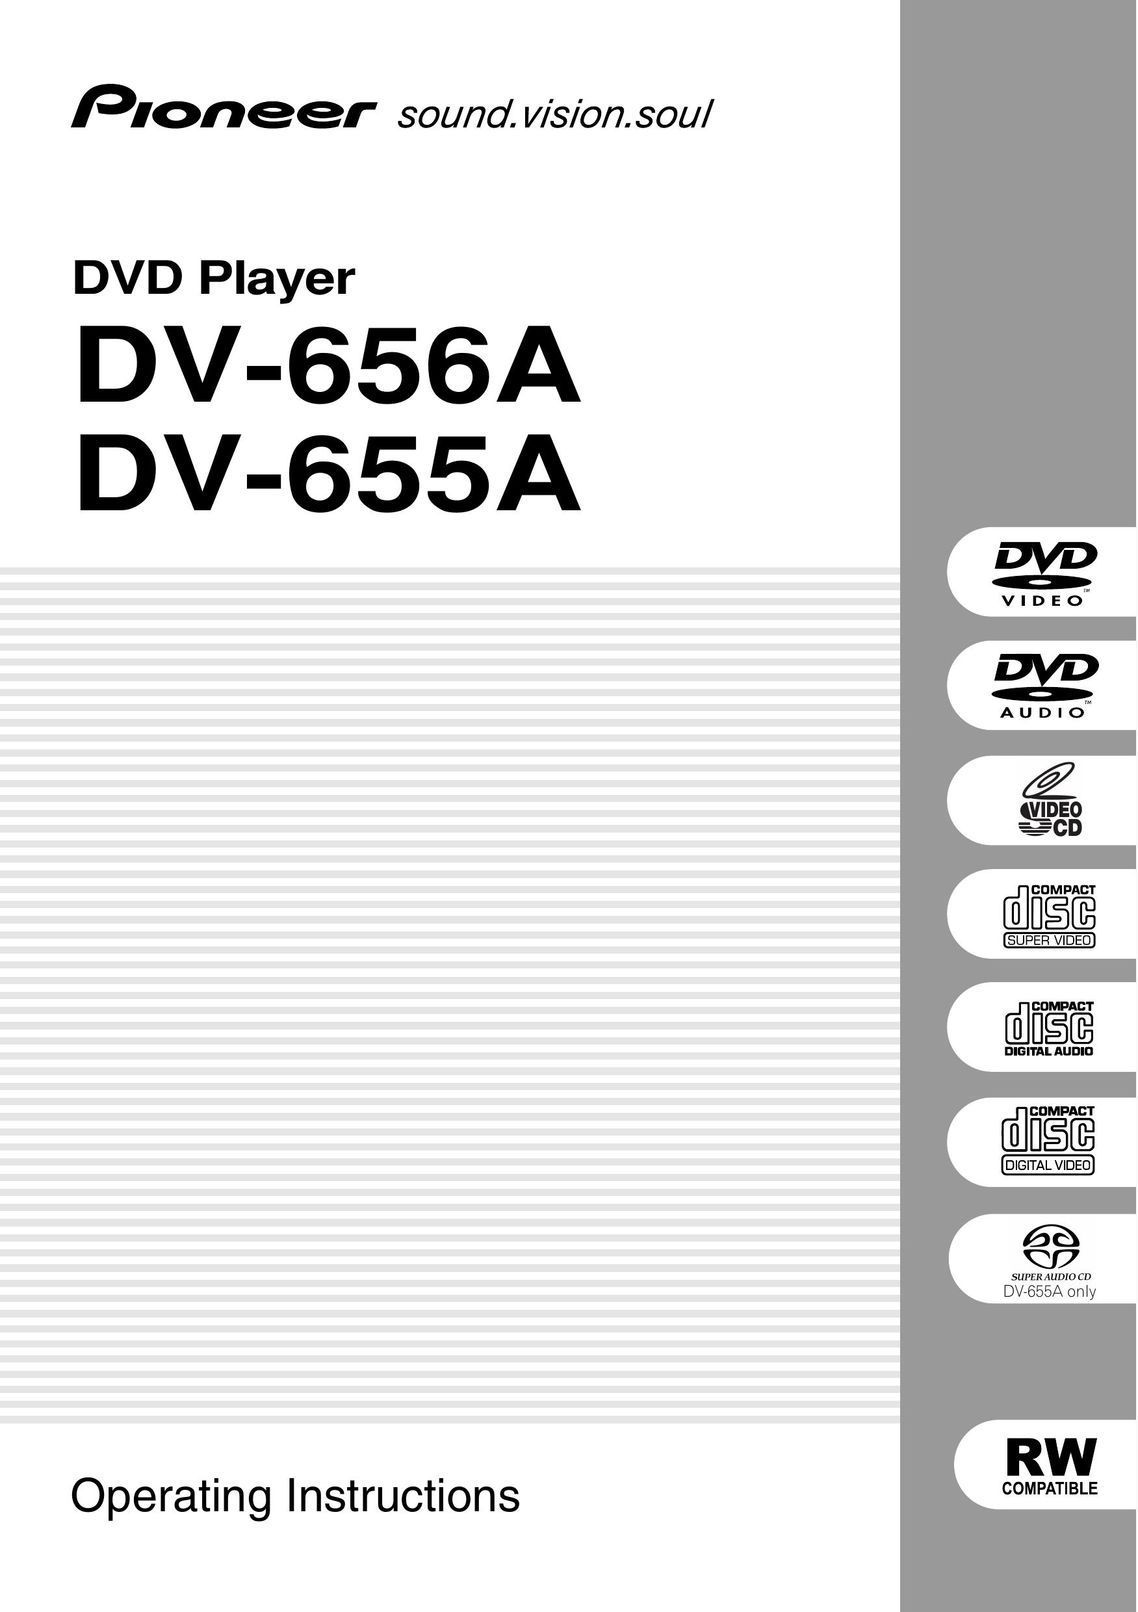 Pioneer 655A DVD Player User Manual